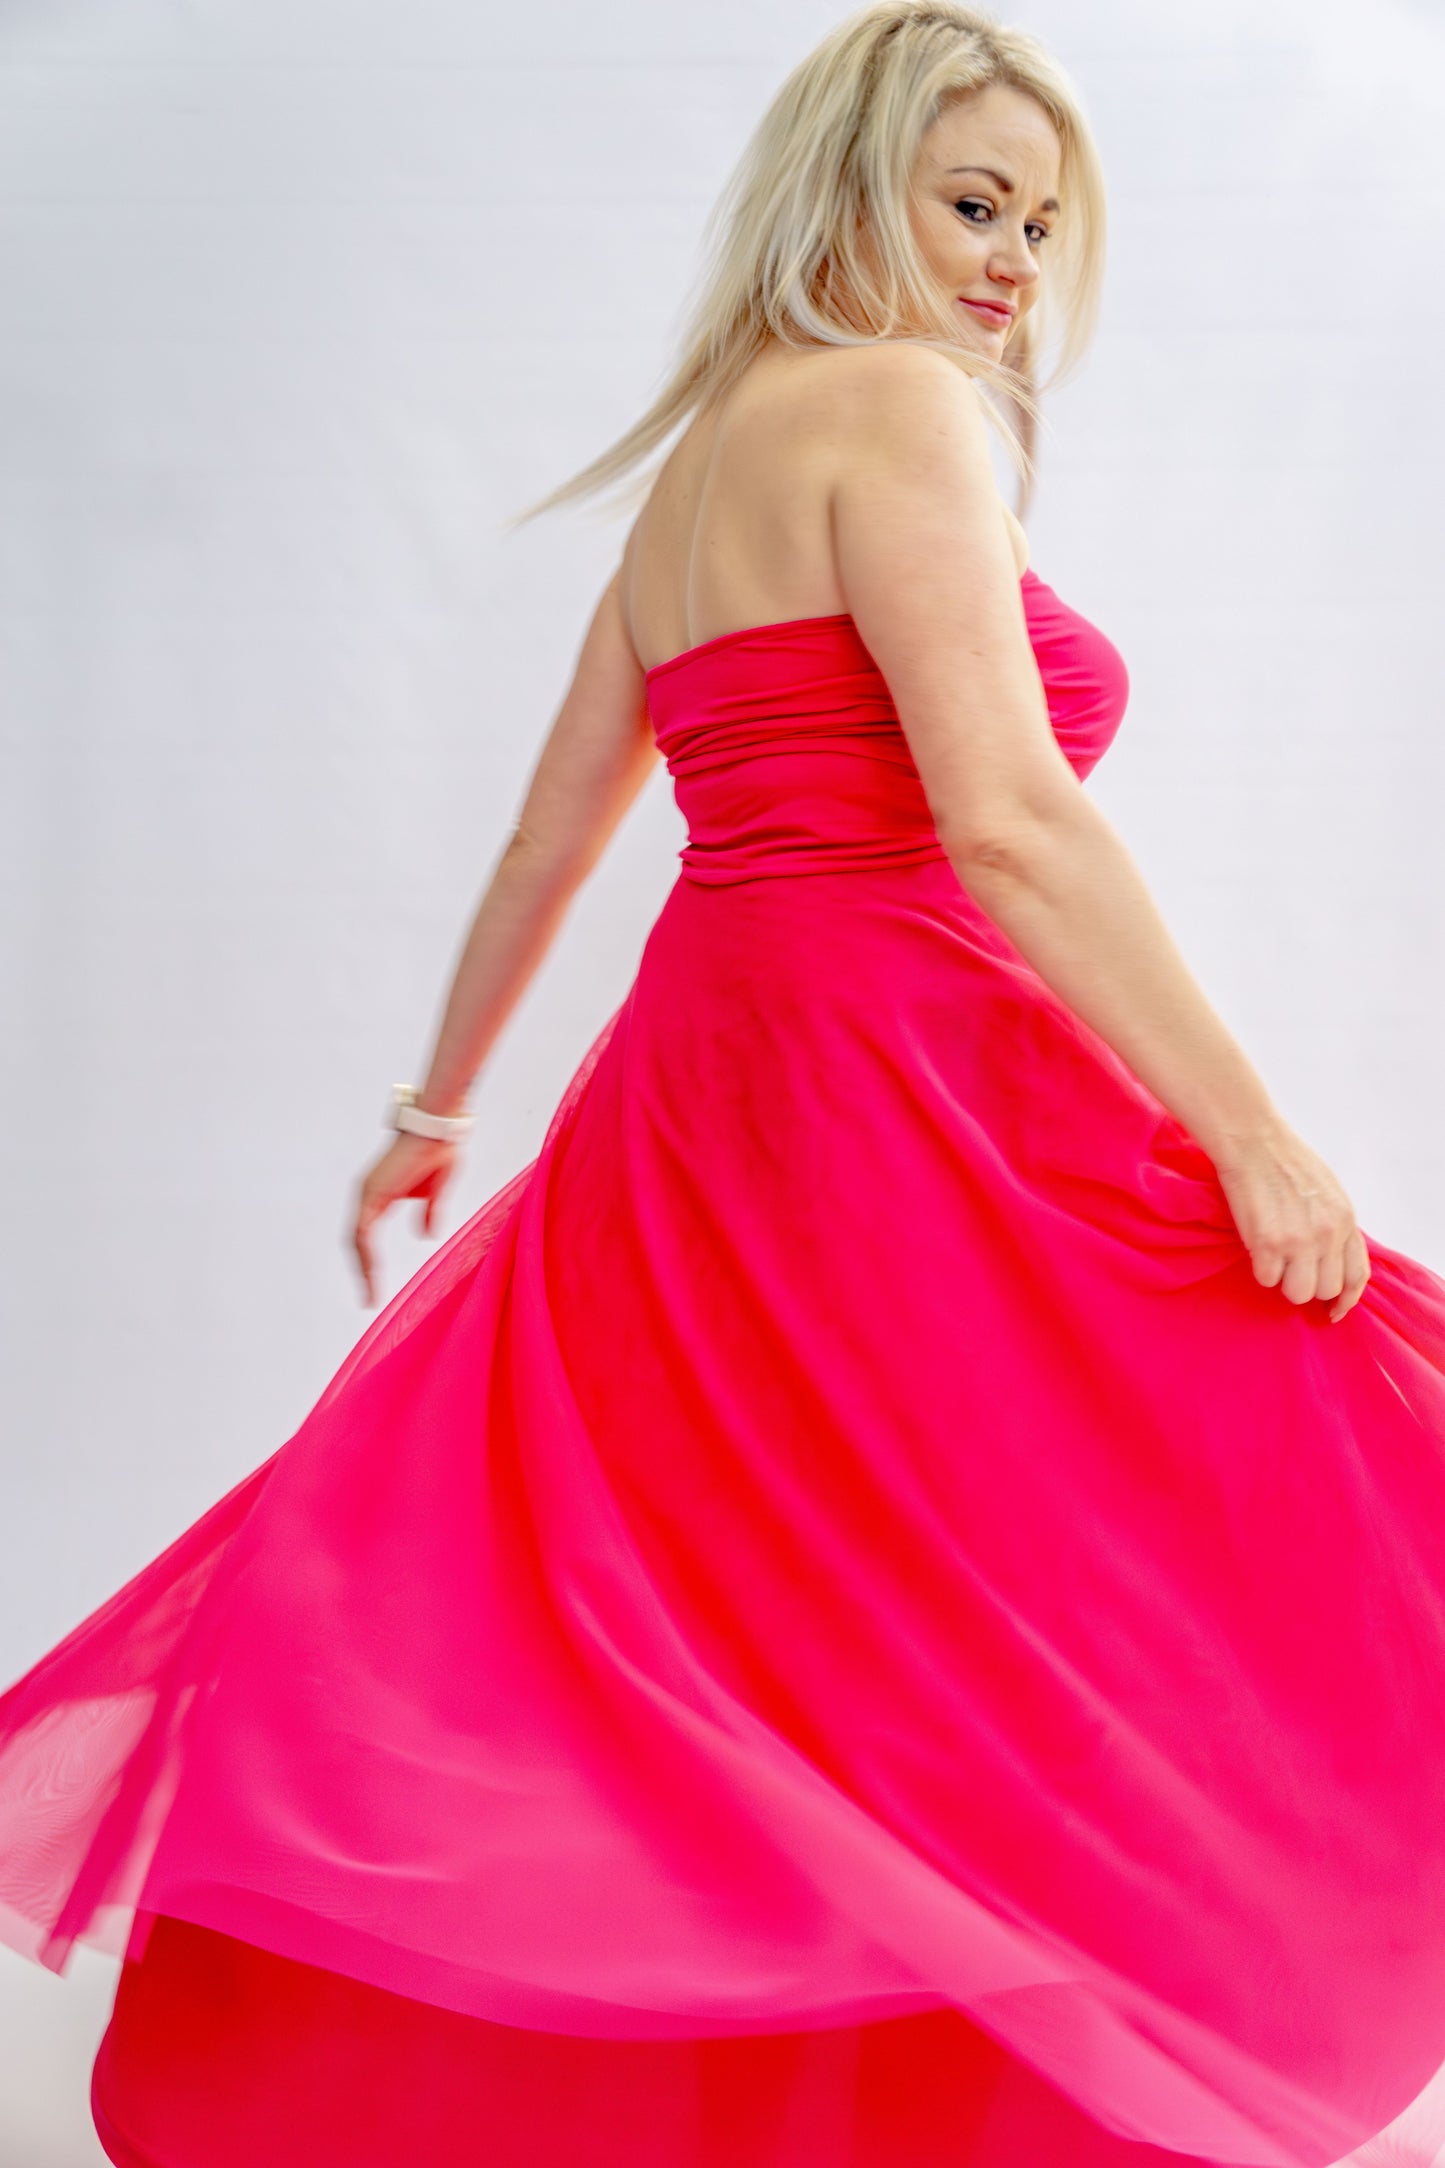 Tulle Skirt - Cerise pink - Ankle length